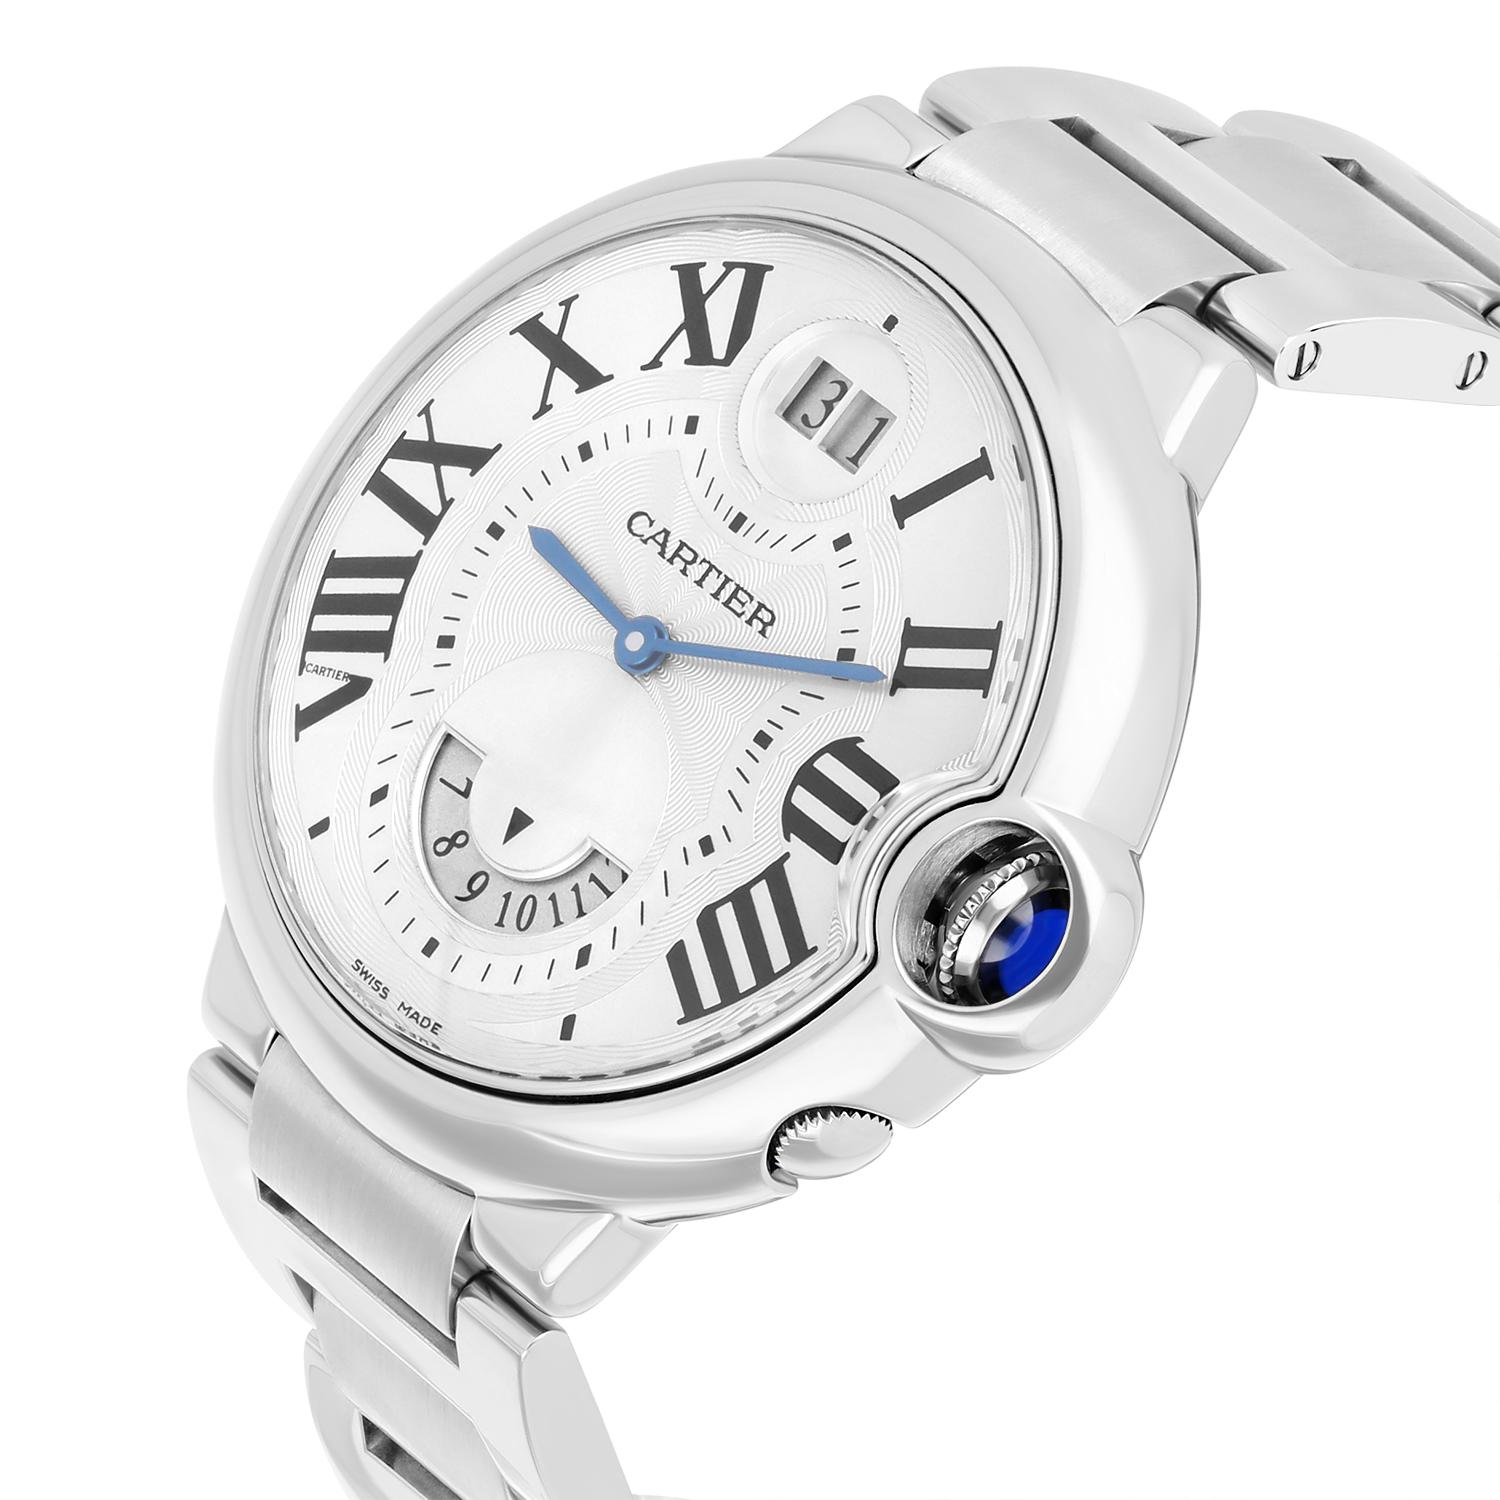 Cartier Ballon Bleu Stainless Steel Two Timezone Quartz Watch 38MM W6920011 In Excellent Condition For Sale In New York, NY